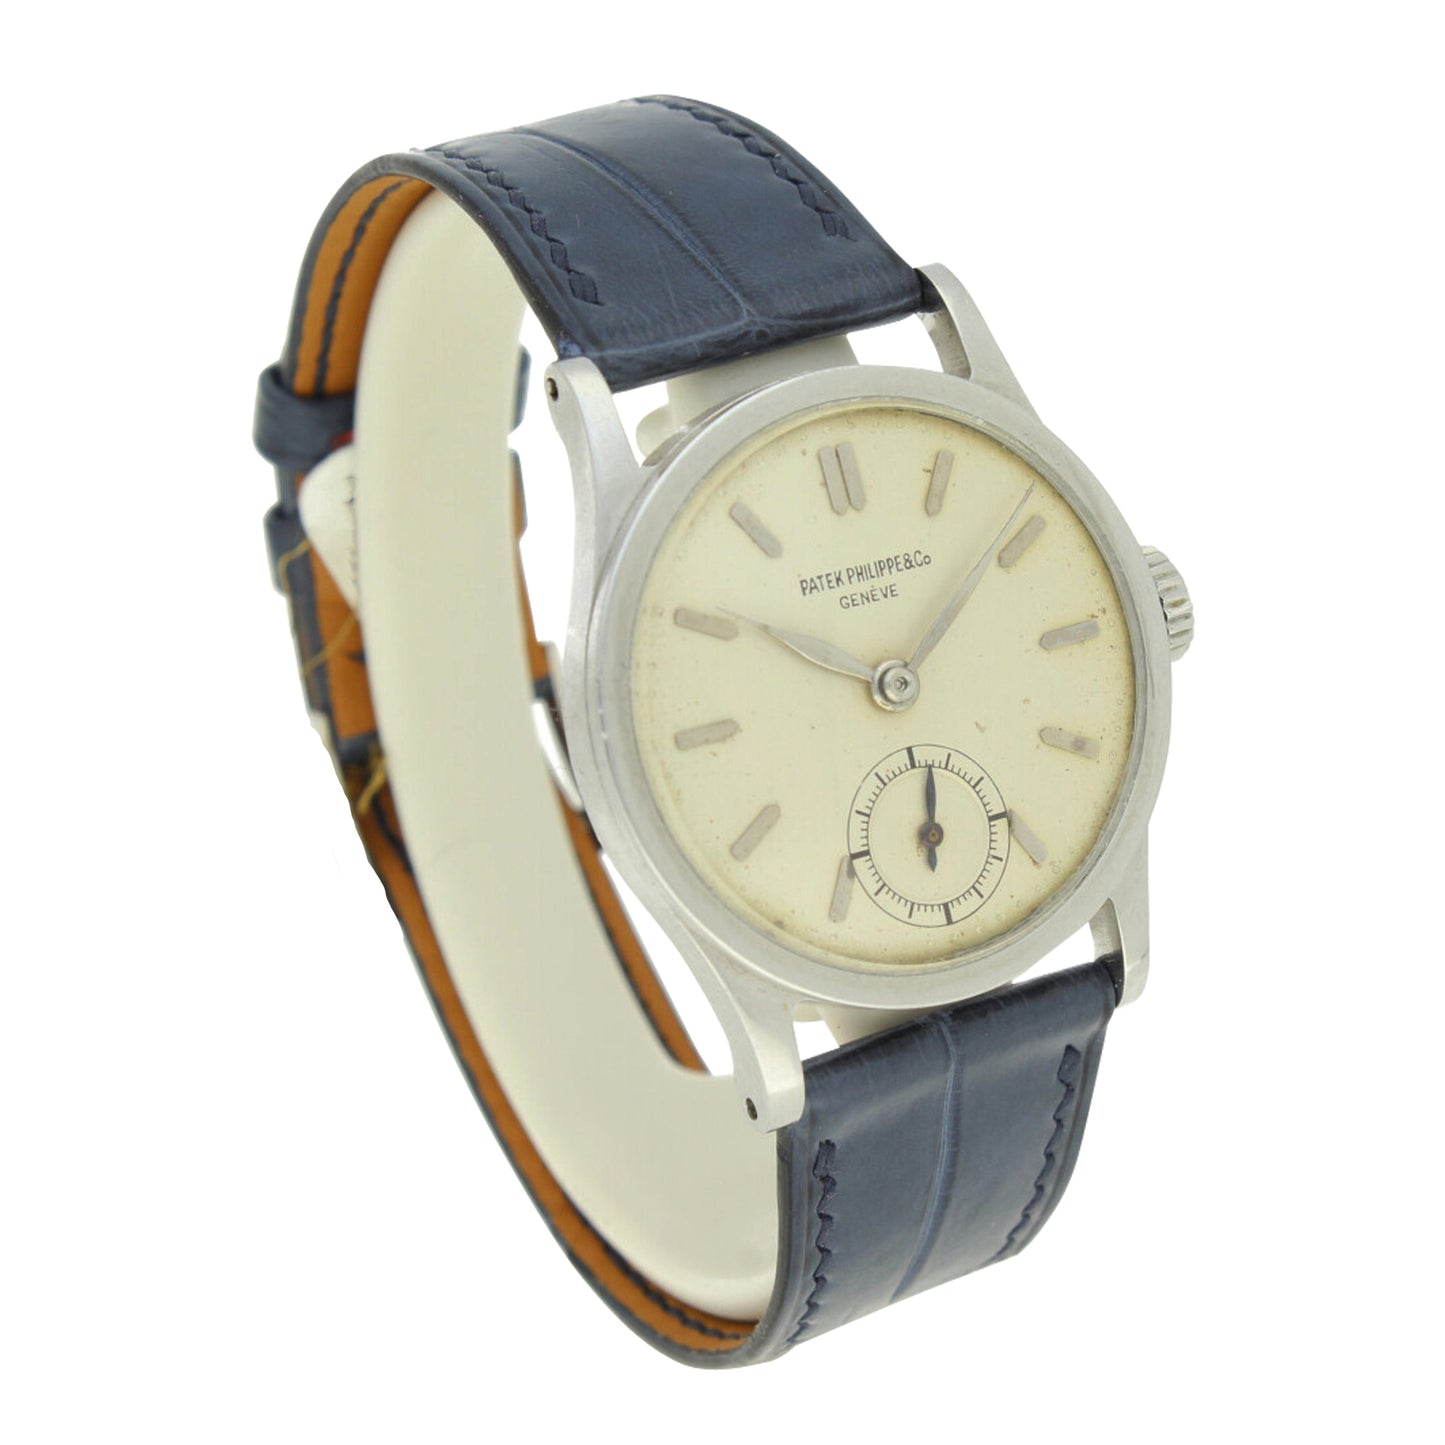 Stainless steel, reference 96 Calatrava wristwatch. Made 1947